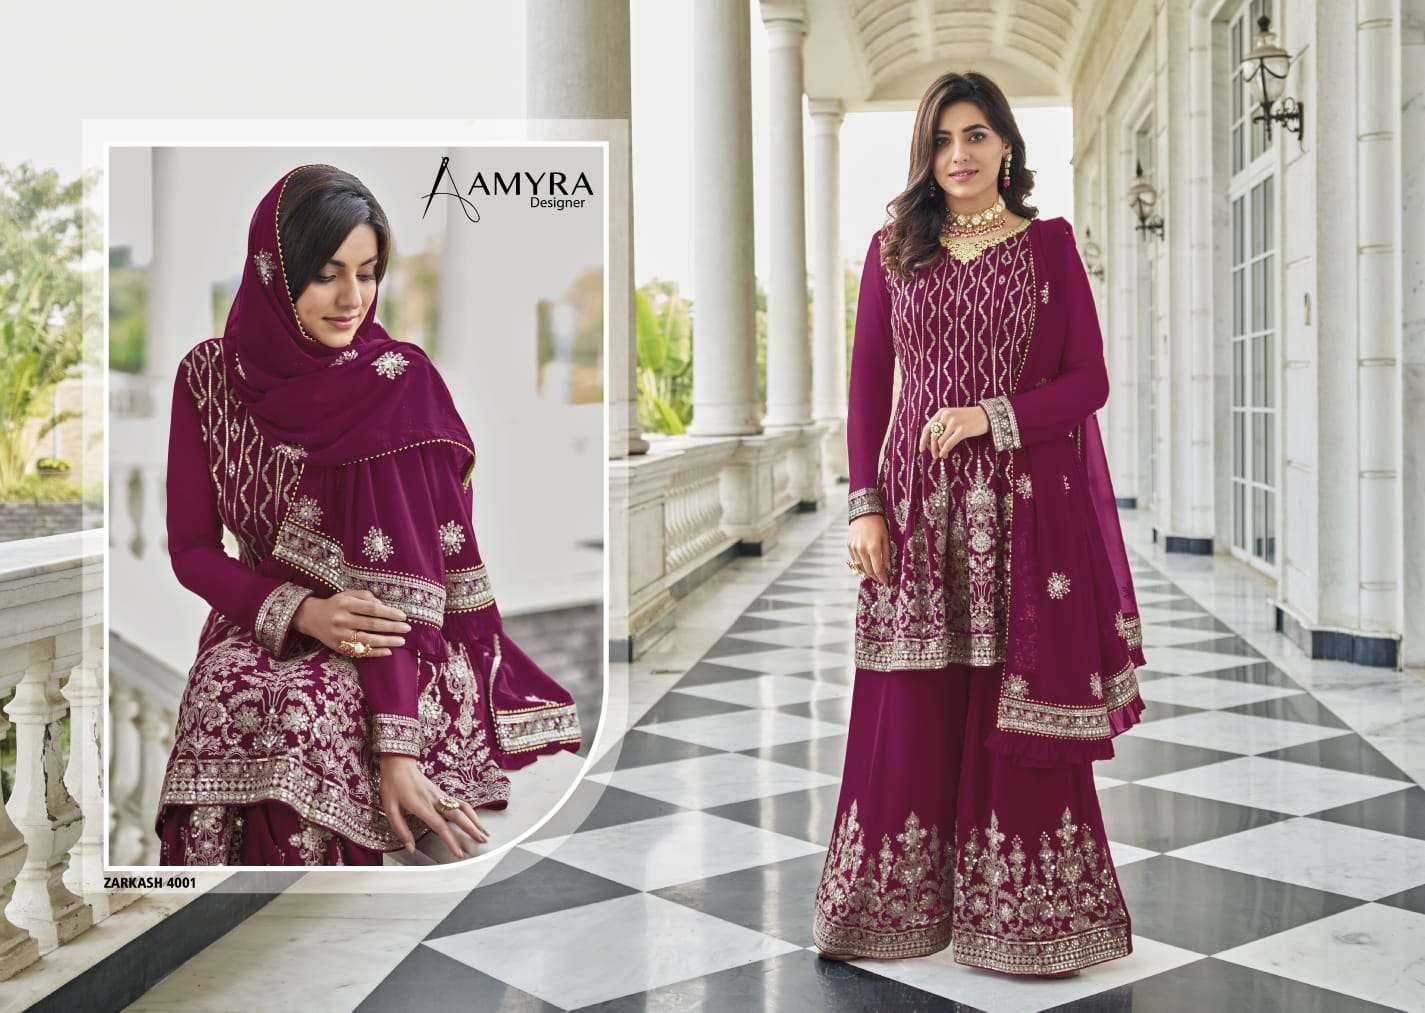 Zarkash Vol-4 By Amyra Designer 4001 To 4004 Series Beautiful Stylish Sharara Suits Fancy Colorful Casual Wear & Ethnic Wear & Ready To Wear Heavy Blooming Georgette Embroidered Dresses At Wholesale Price